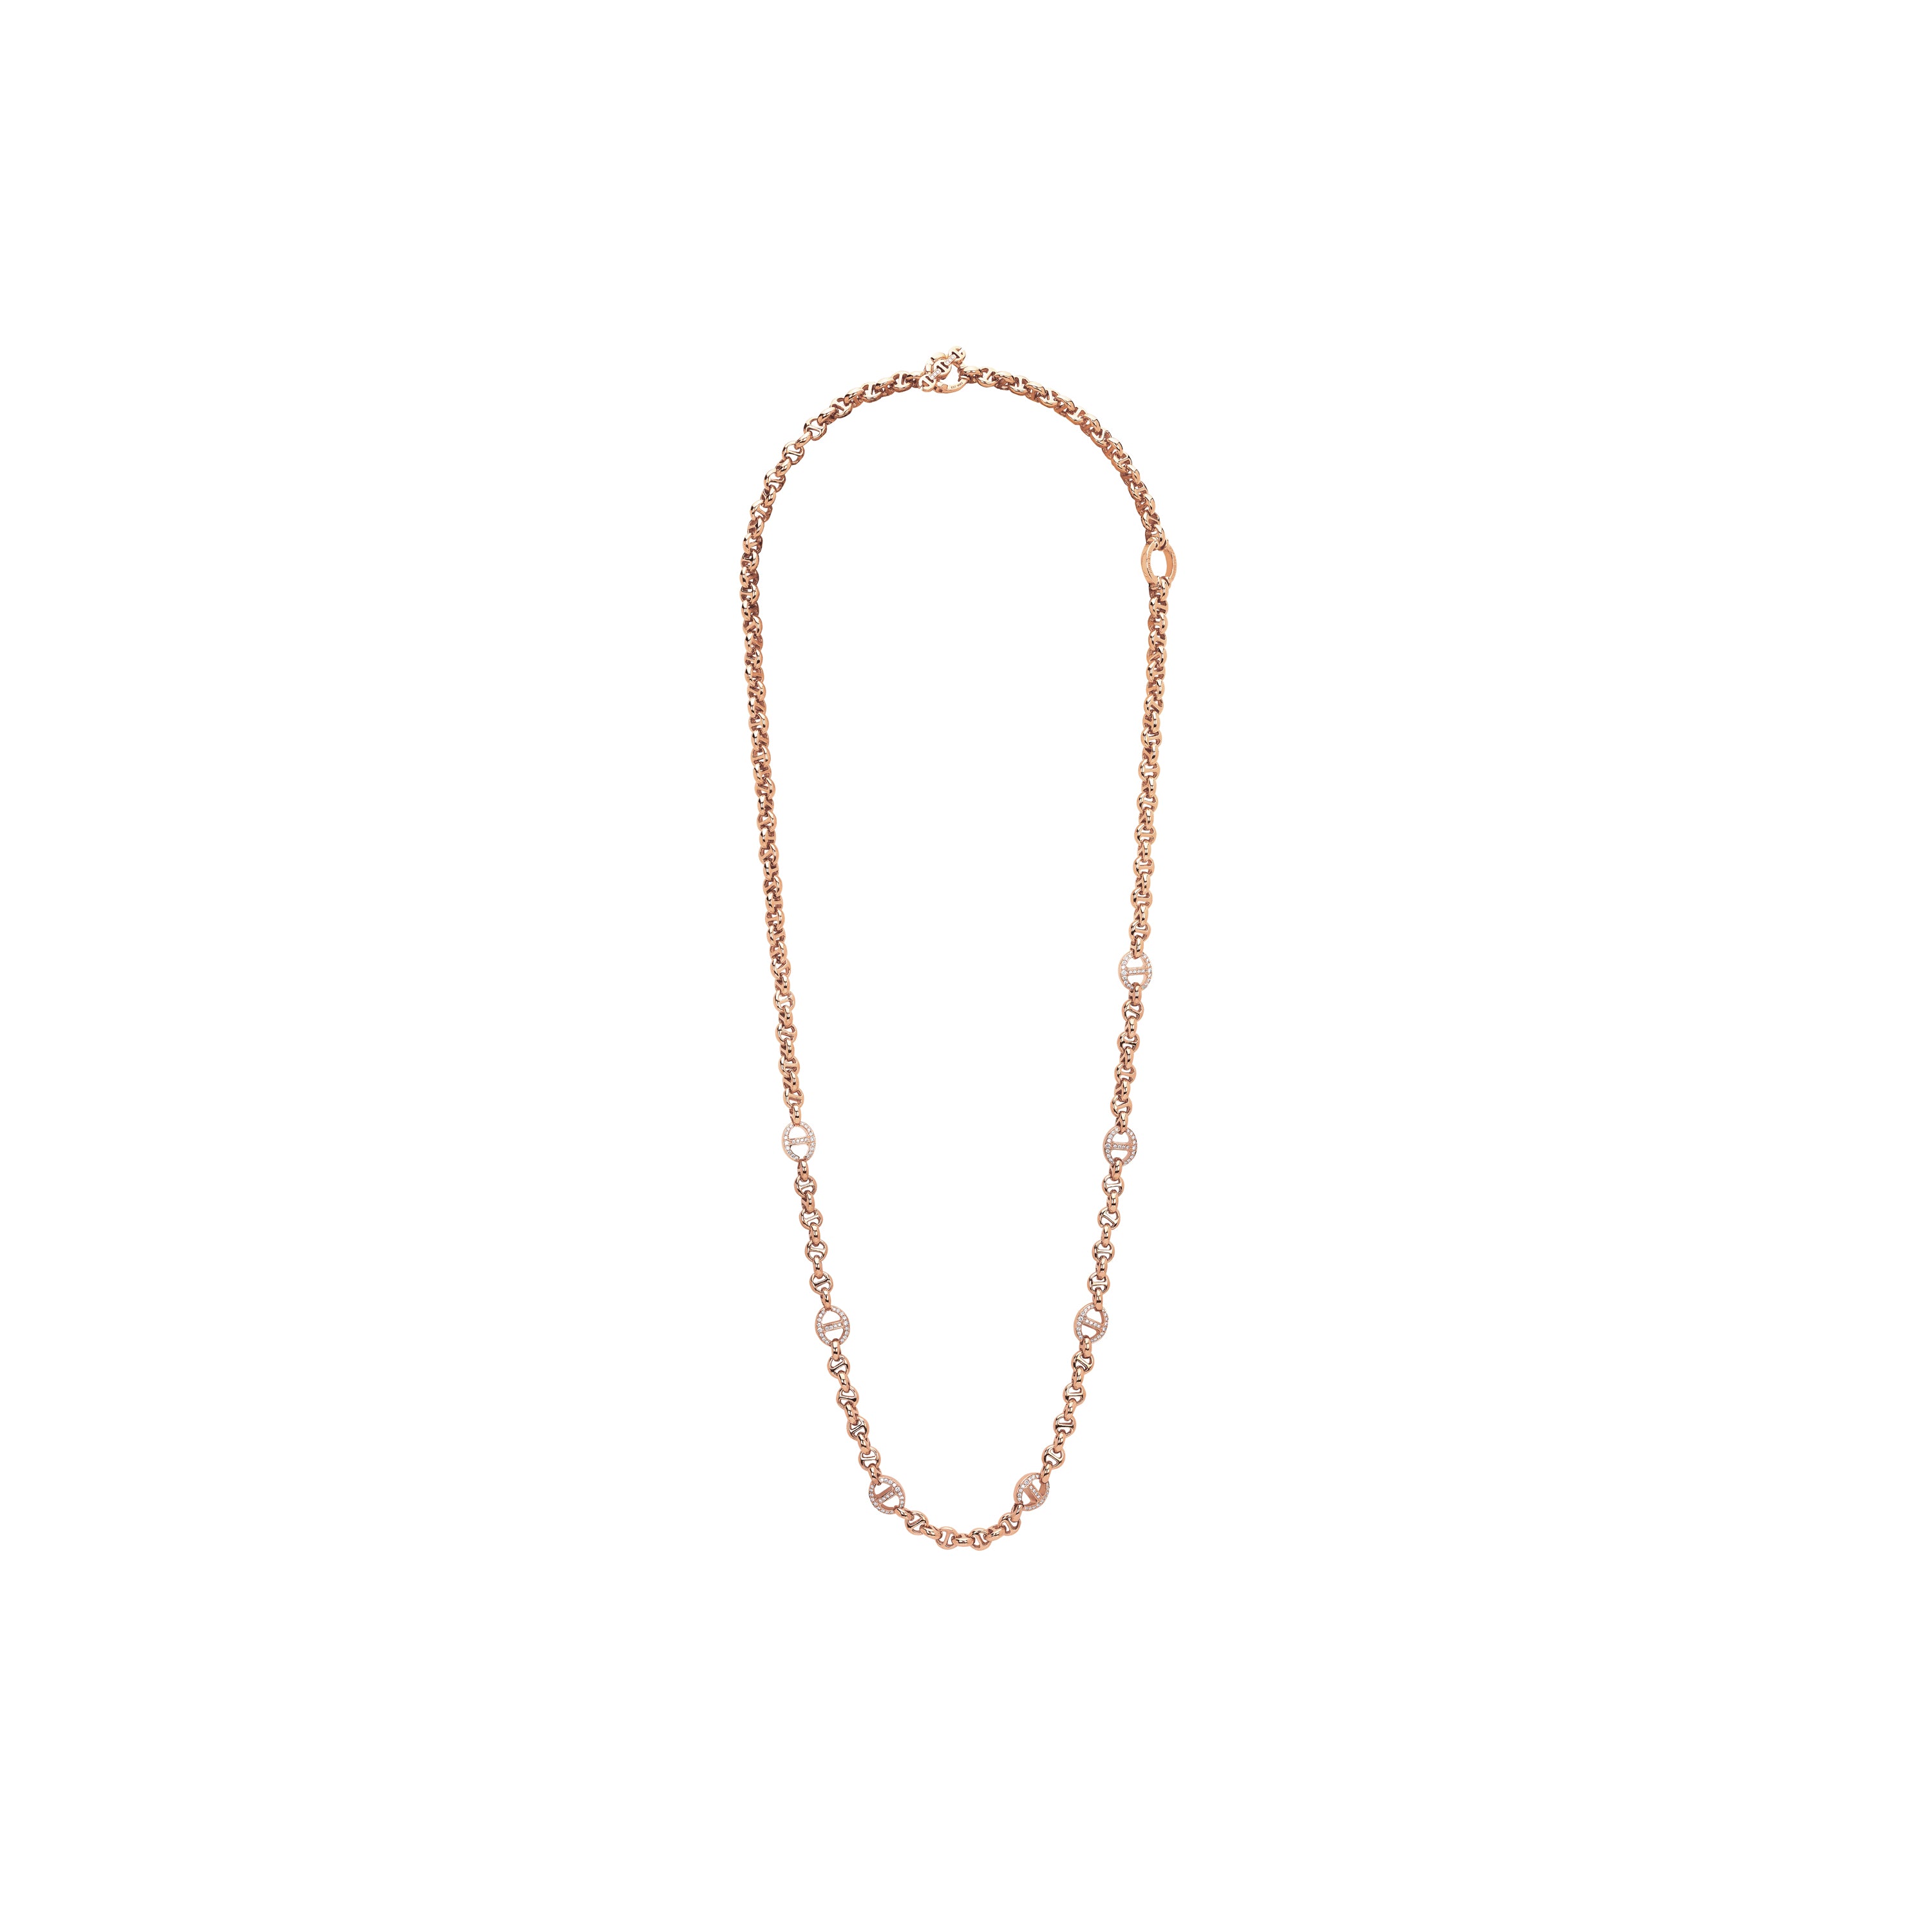 5MM OPEN-LINK™ NECKLACE WITH SEVEN 10MM LINKS WITH DIAMONDS